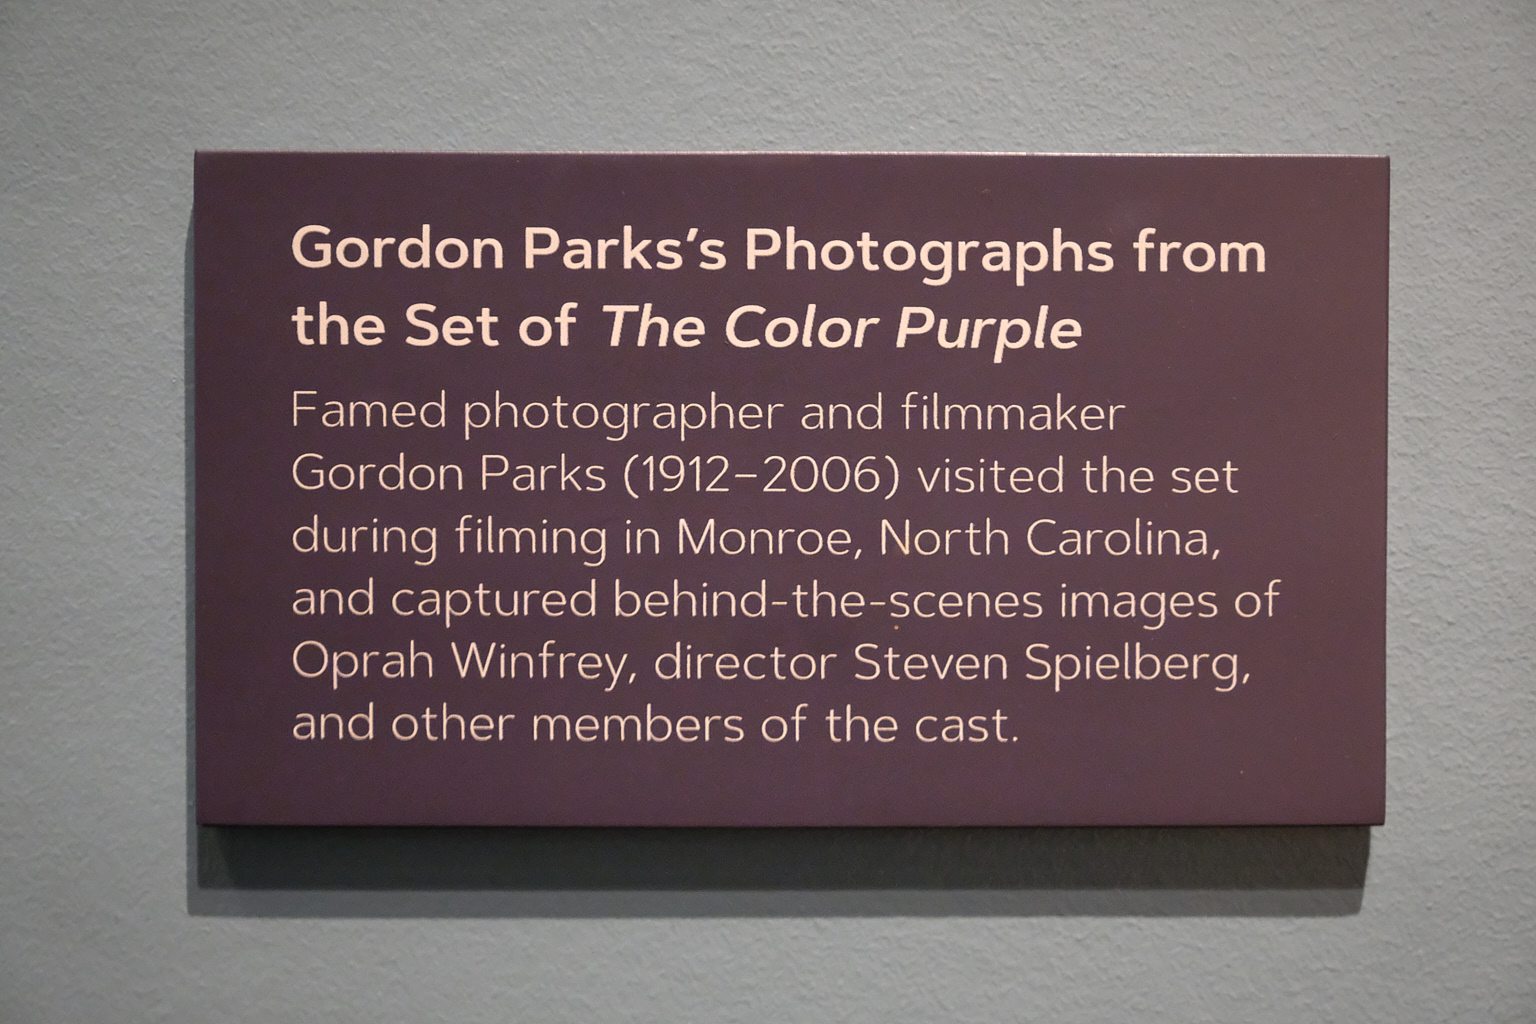  Gordon Parks! Gordon freaking Parks!!!…just hanging around shooting behind-the-scenes images! Incredible. You know you have something special going on when there’s something like that happening and it’s just a footnote. 